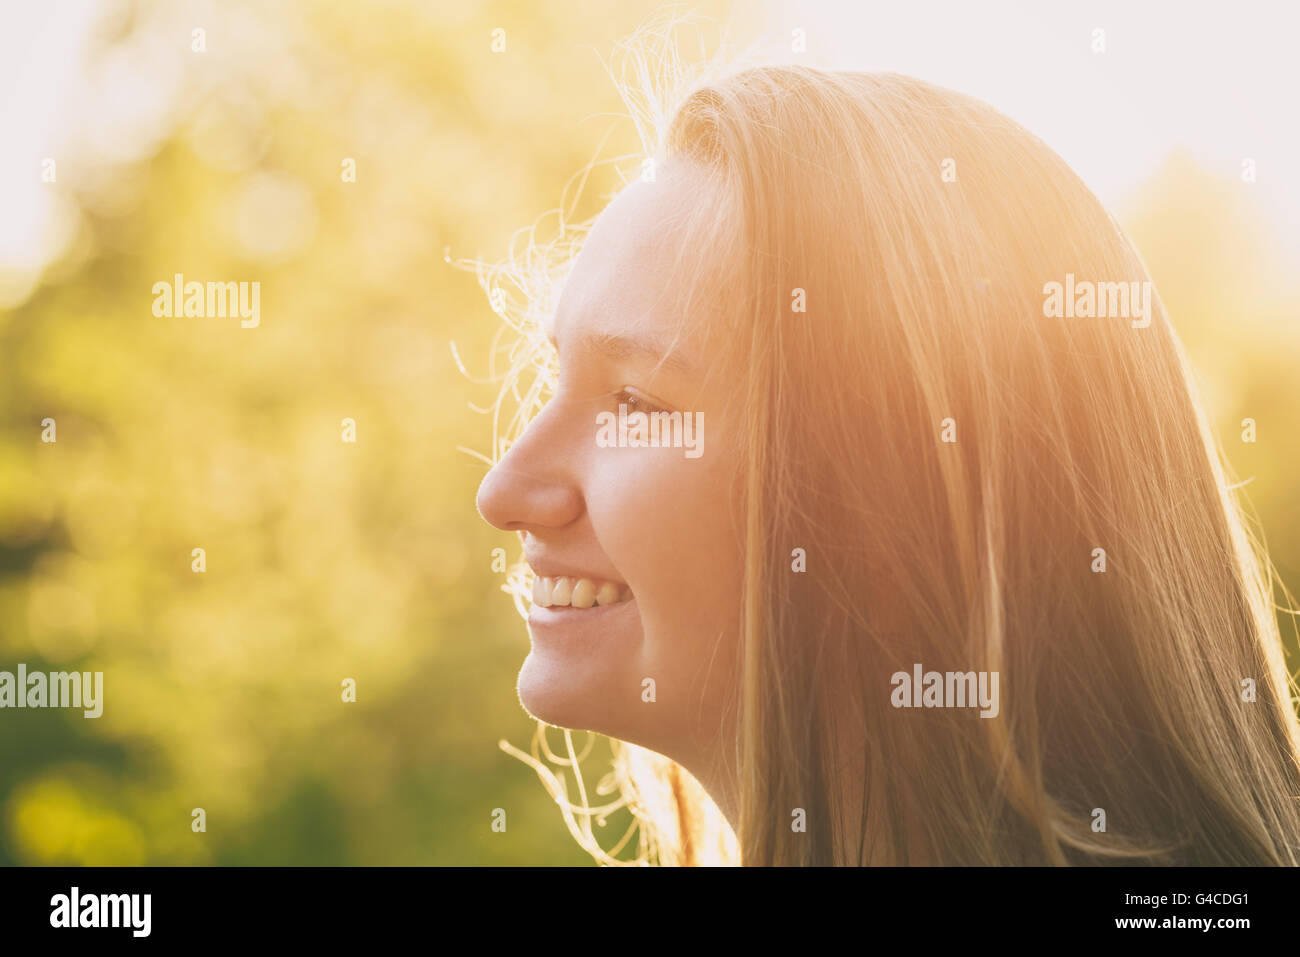 pretty teen girl smiling in warm sunset Stock Photo